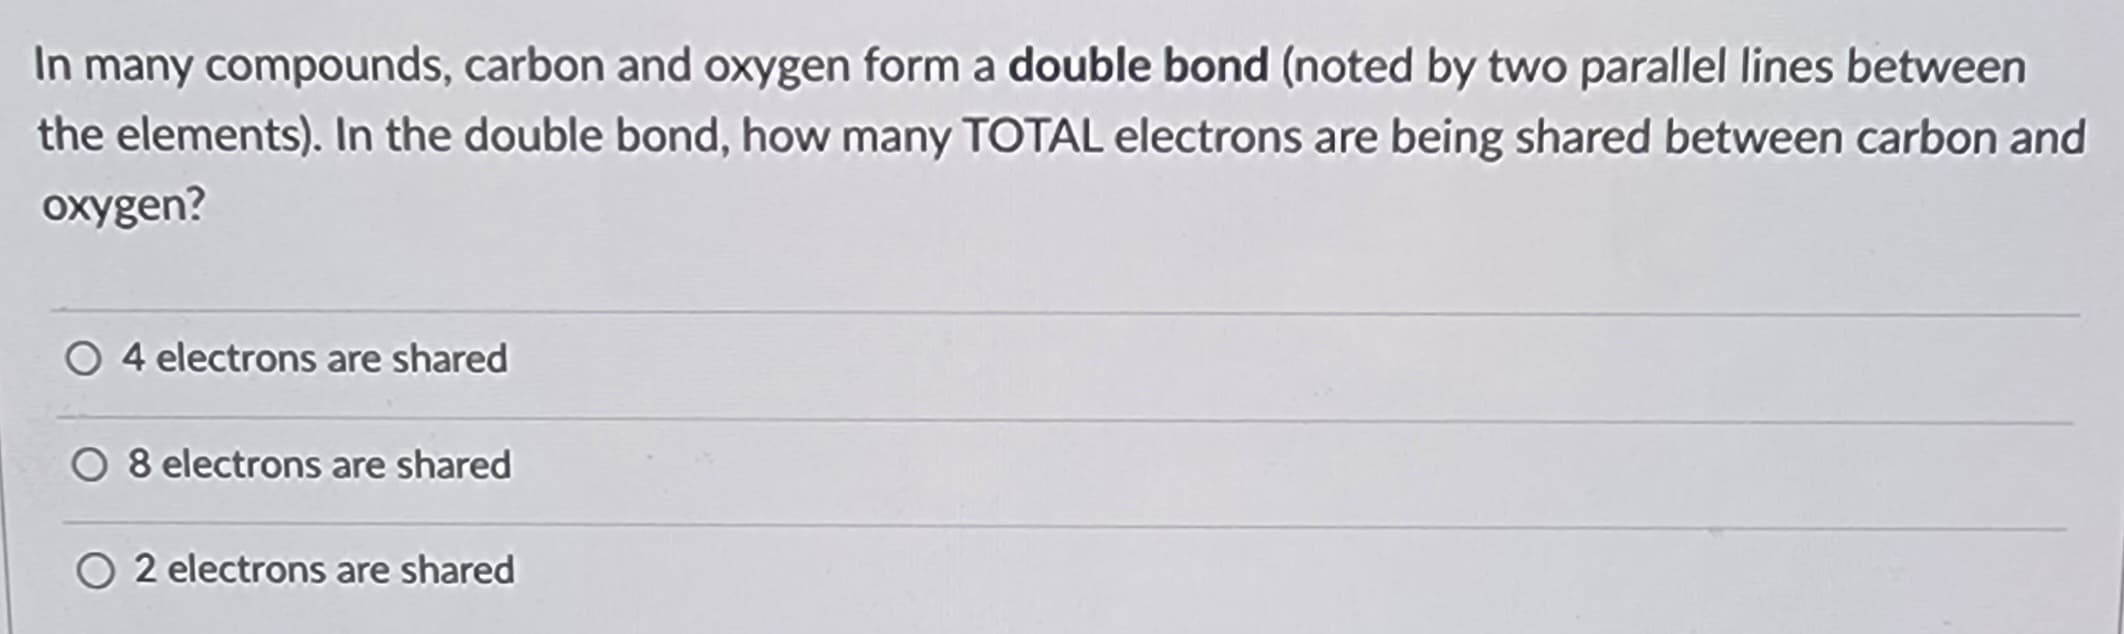 In many compounds, carbon and oxygen form a double bond (noted by two parallel lines between
the elements). In the double bond, how many TOTAL electrons are being shared between carbon and
oxygen?
O4 electrons are shared
O 8 electrons are shared
O2 electrons are shared